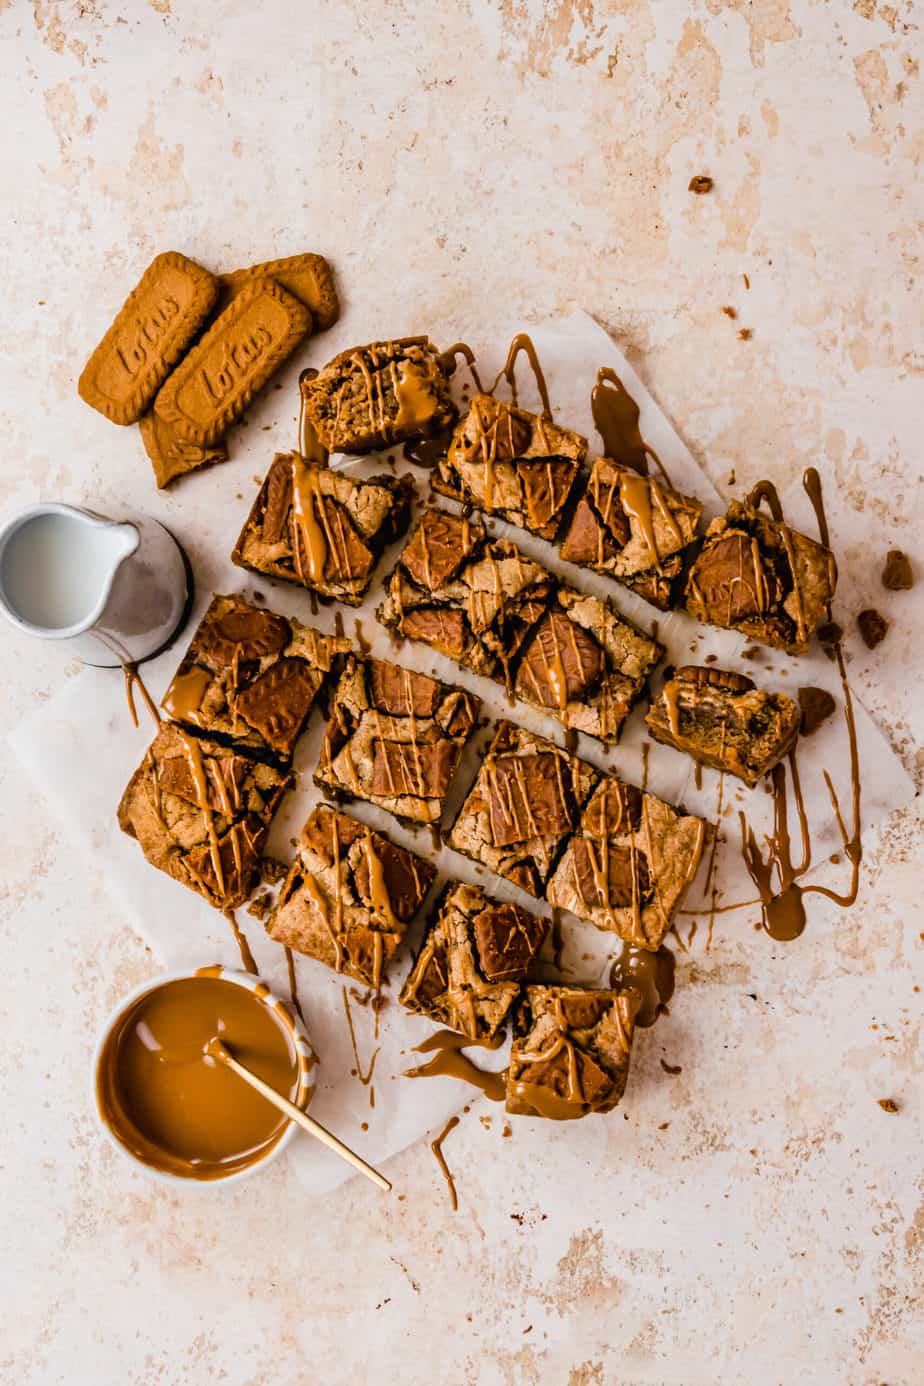 Lotus Biscoff Blondies on baking paper with drizzle of caramel sauce.